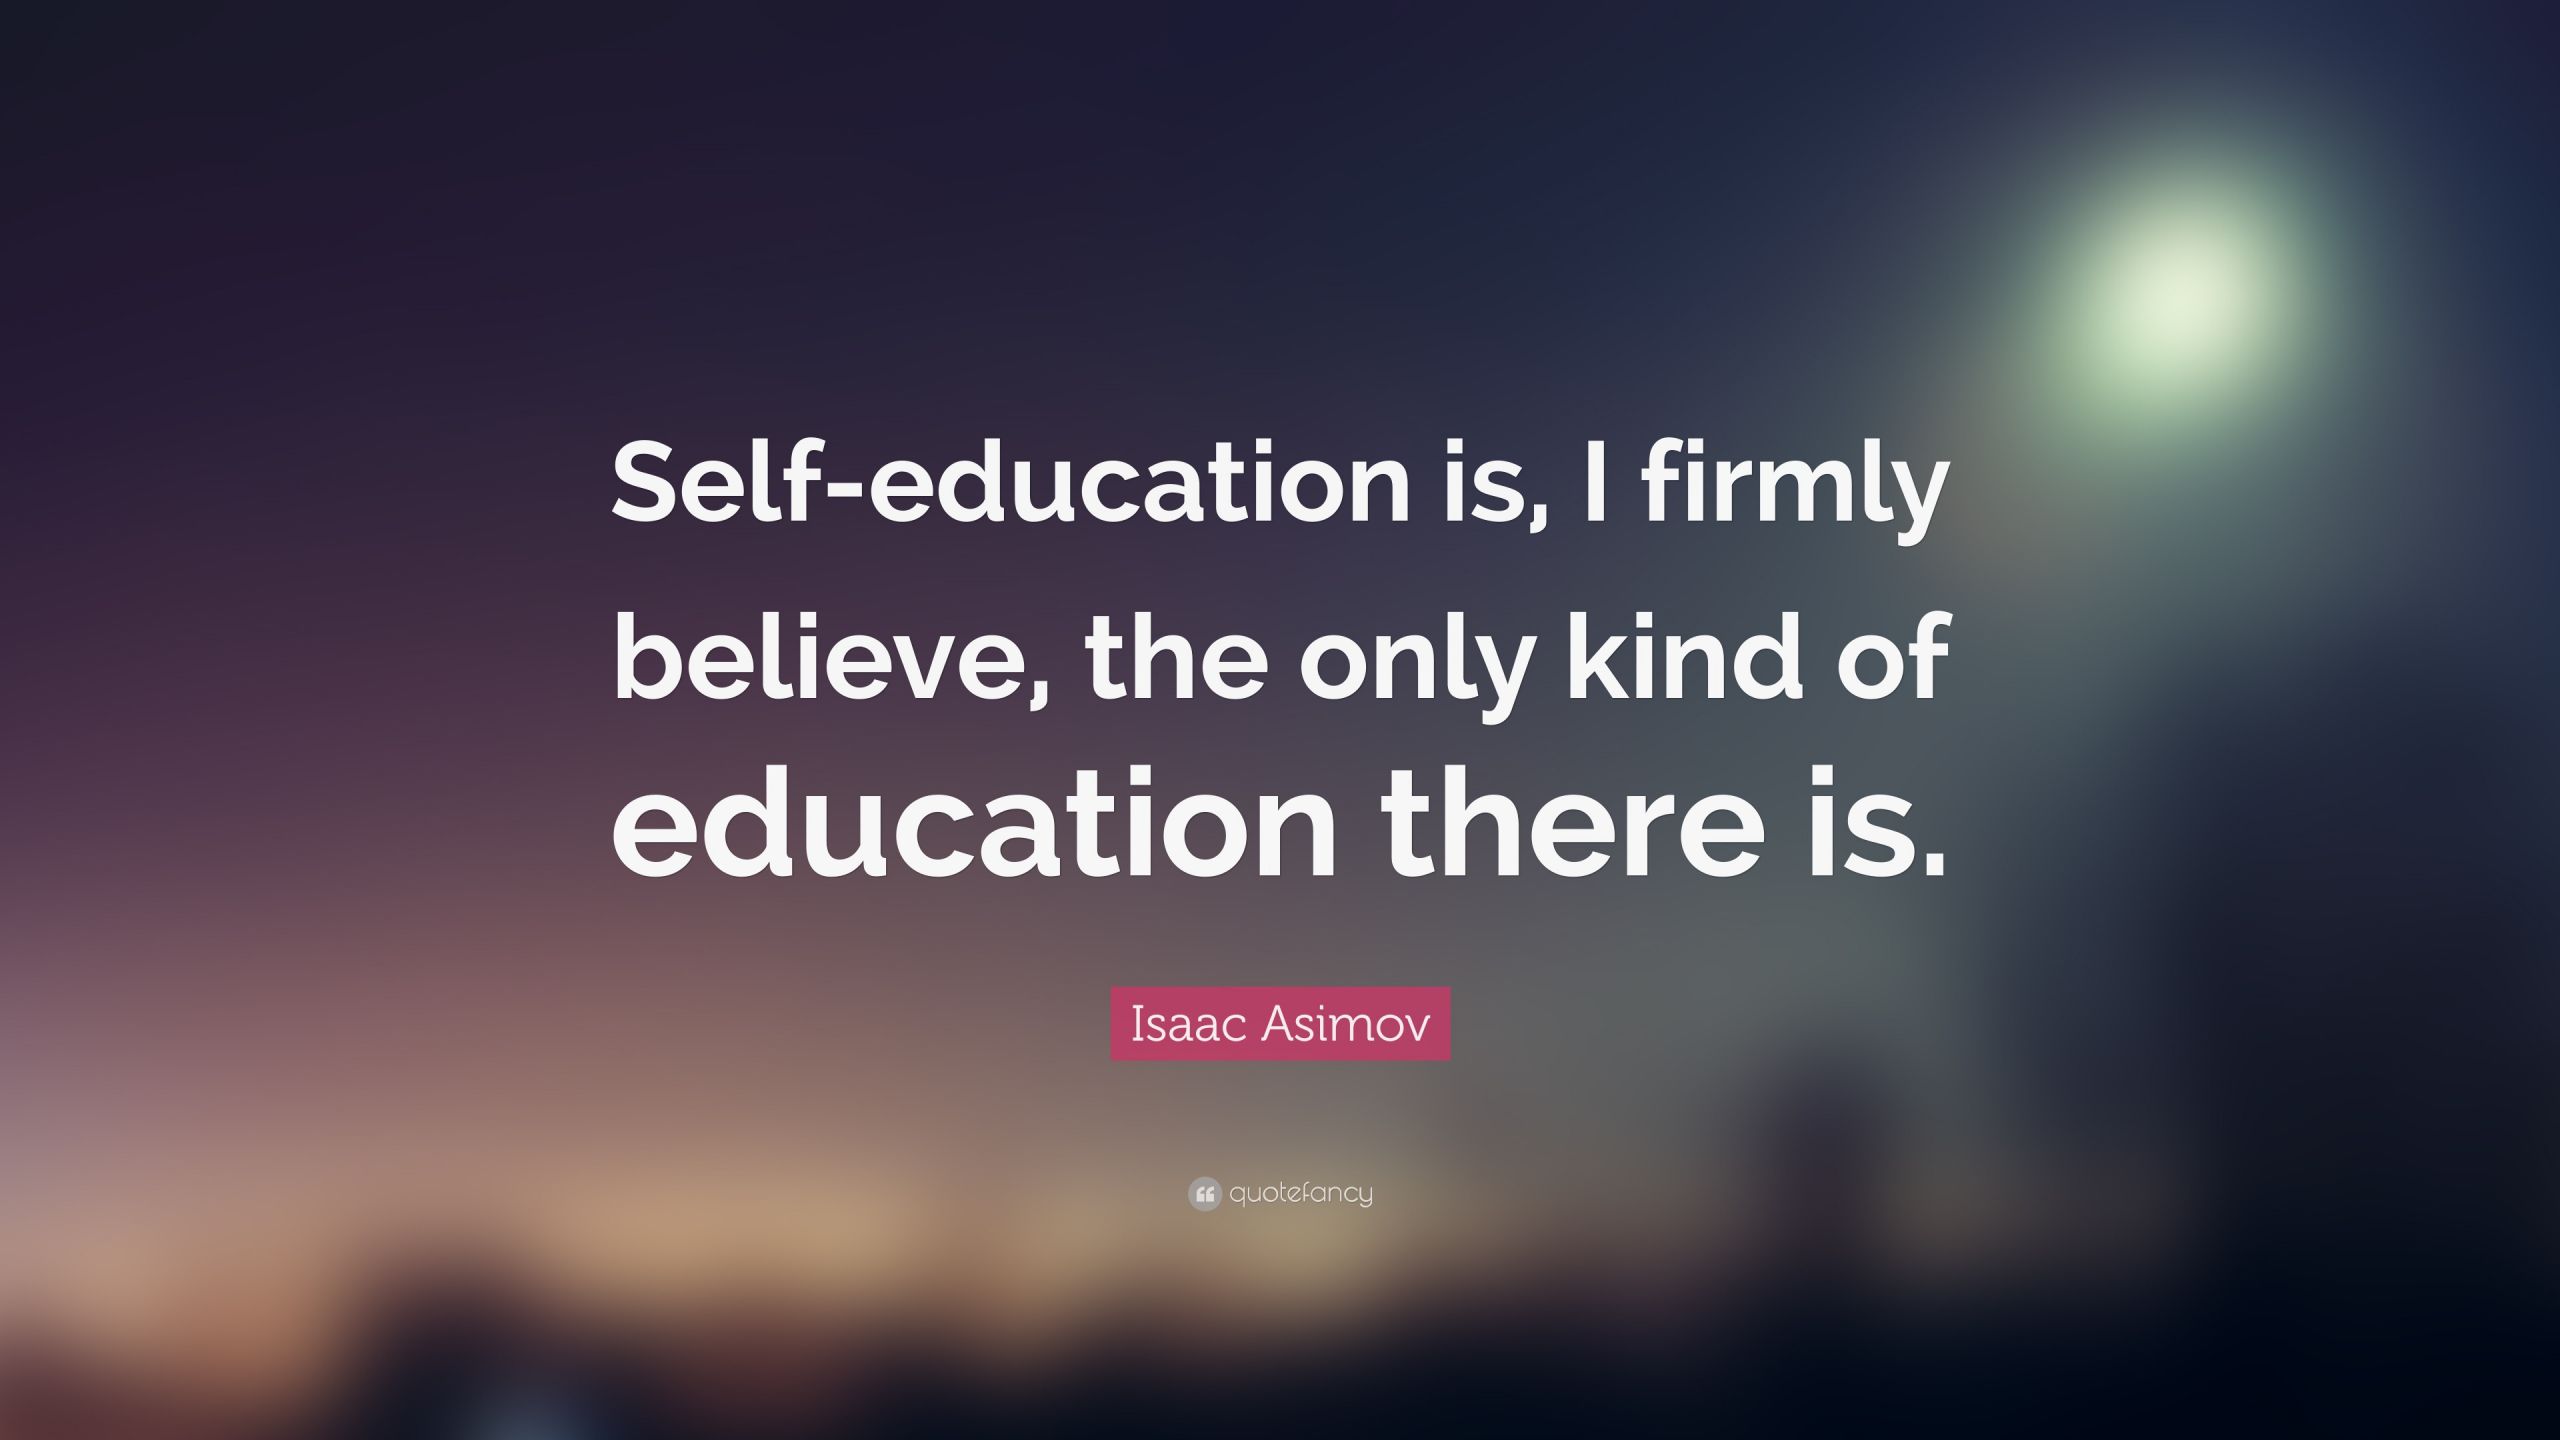 Self Education Quotes
 Isaac Asimov Quote “Self education is I firmly believe